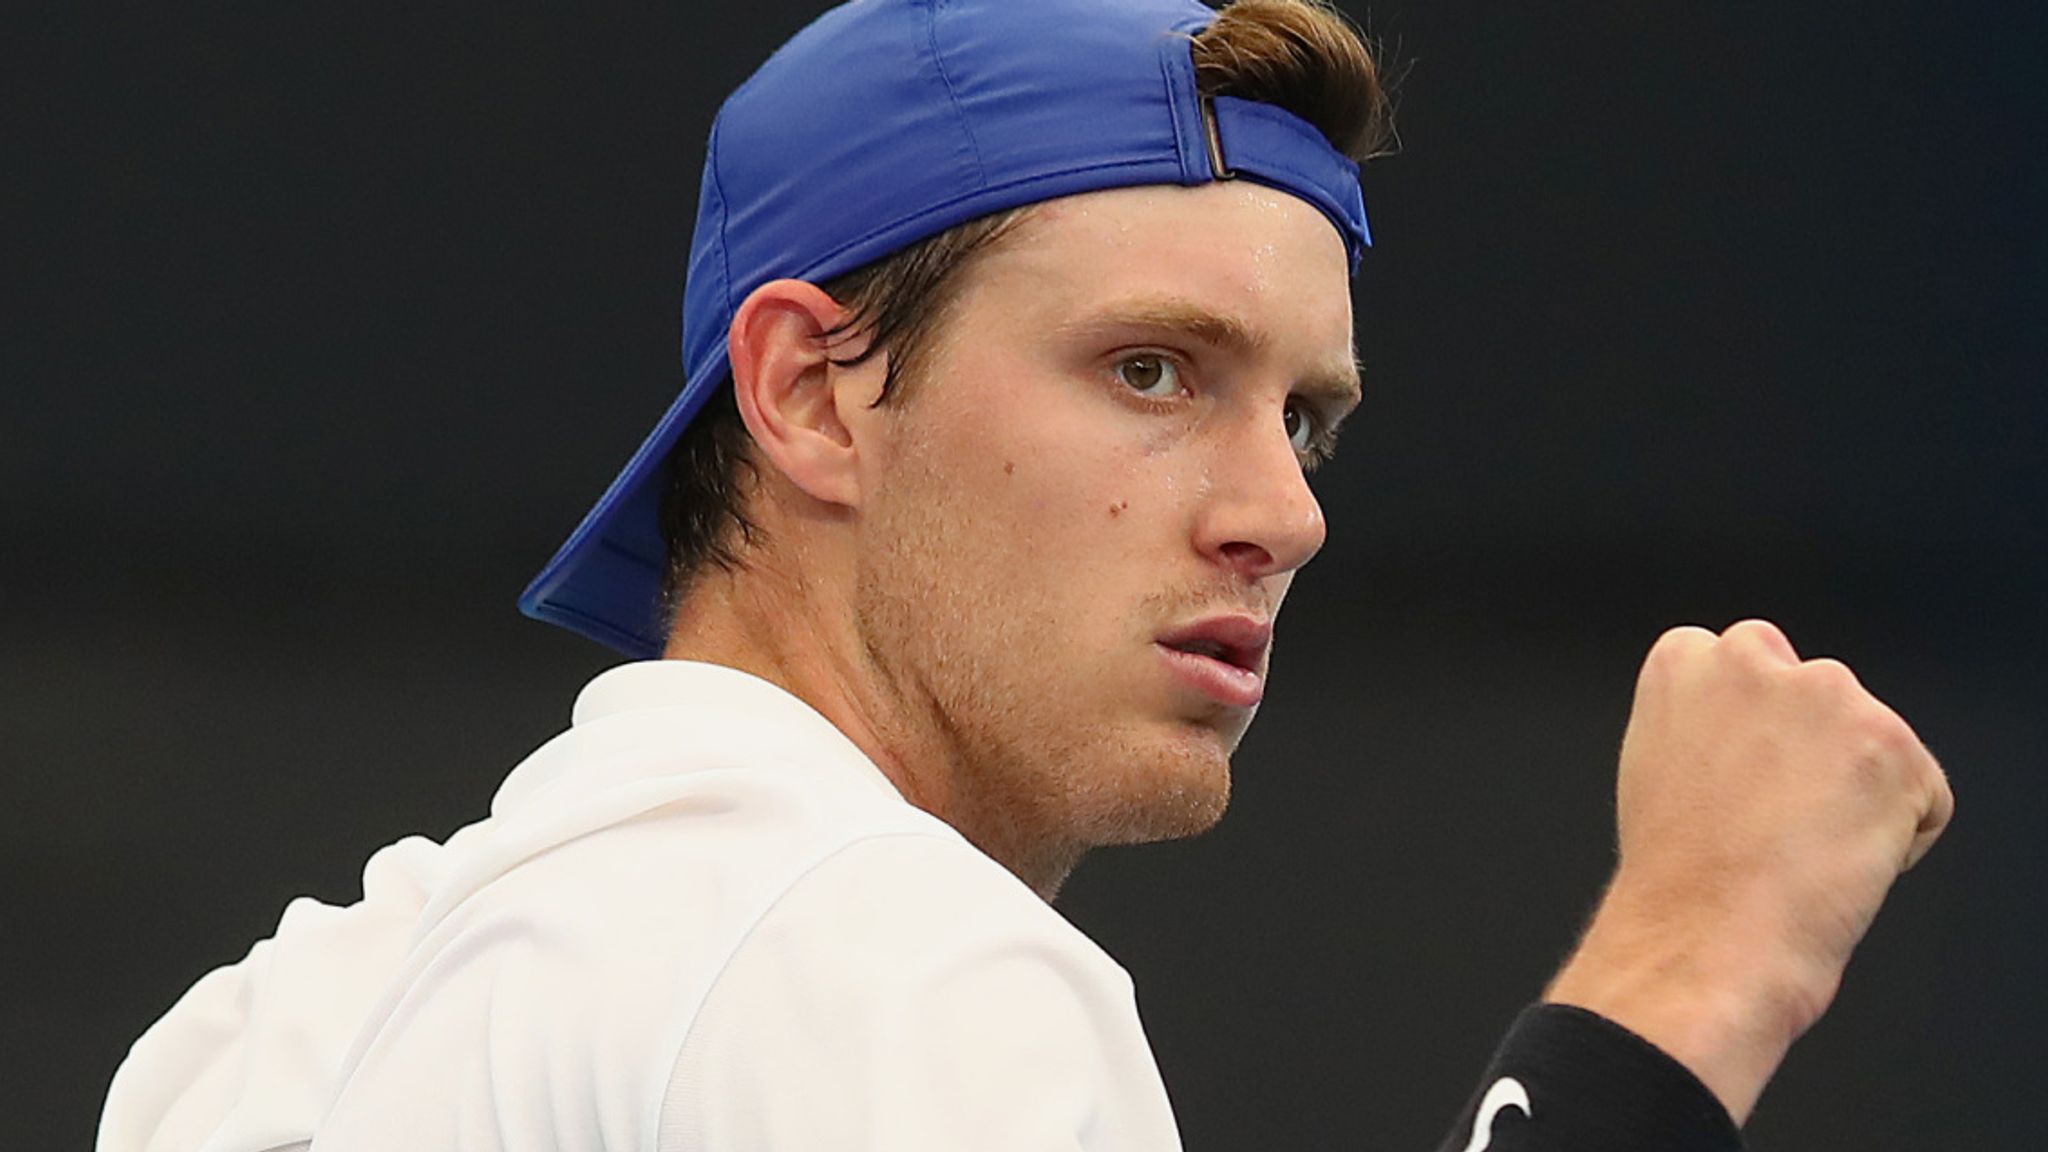 Nicolas Jarry given 11-month doping ban by the International Tennis Federation Tennis News Sky Sports